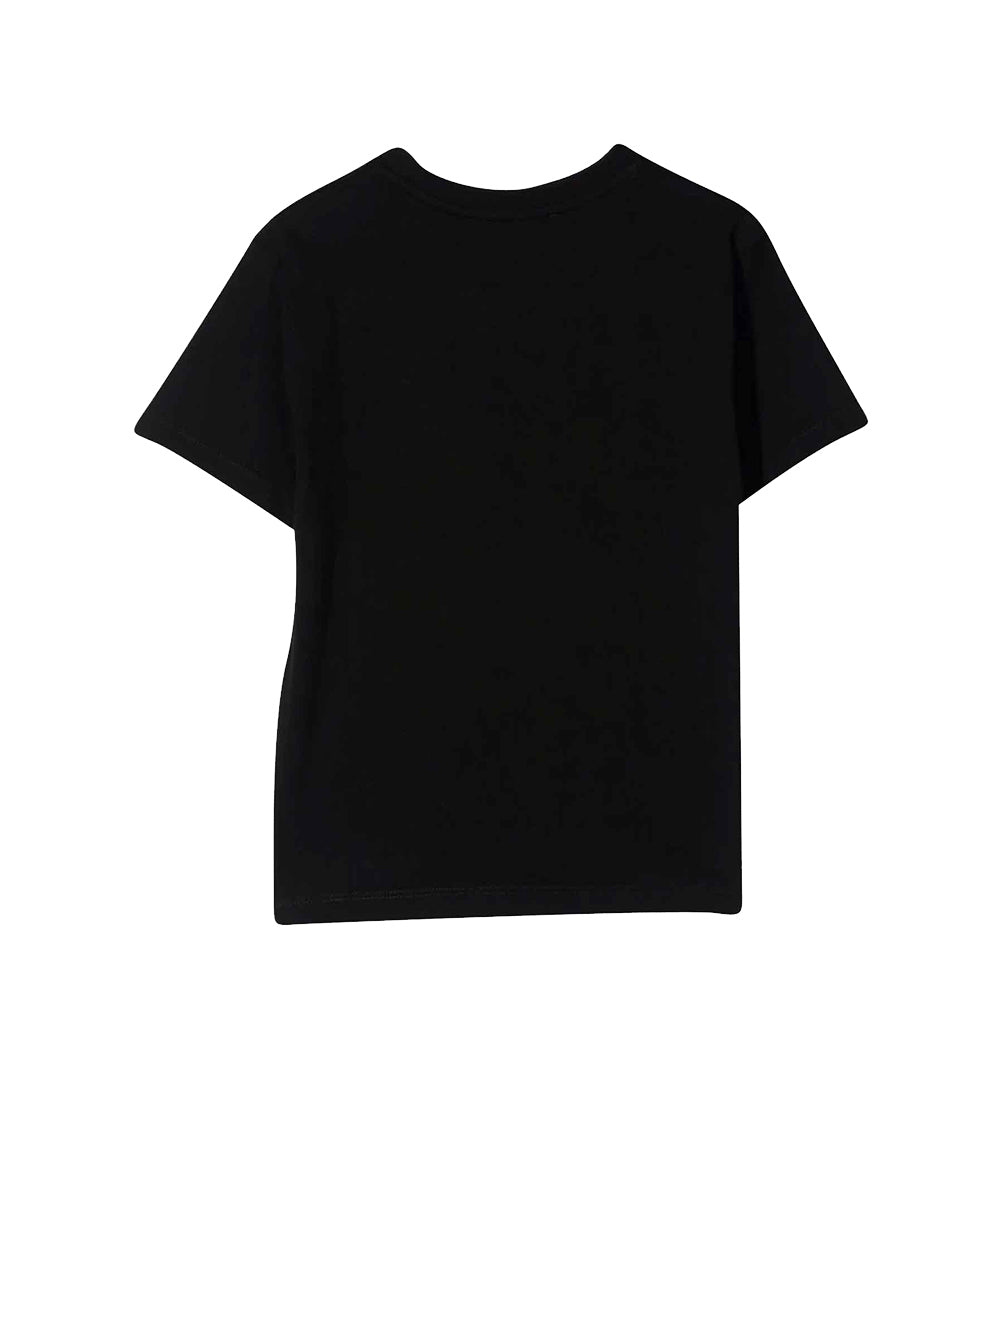 T-Shirt Con Stampa Frontale Nero